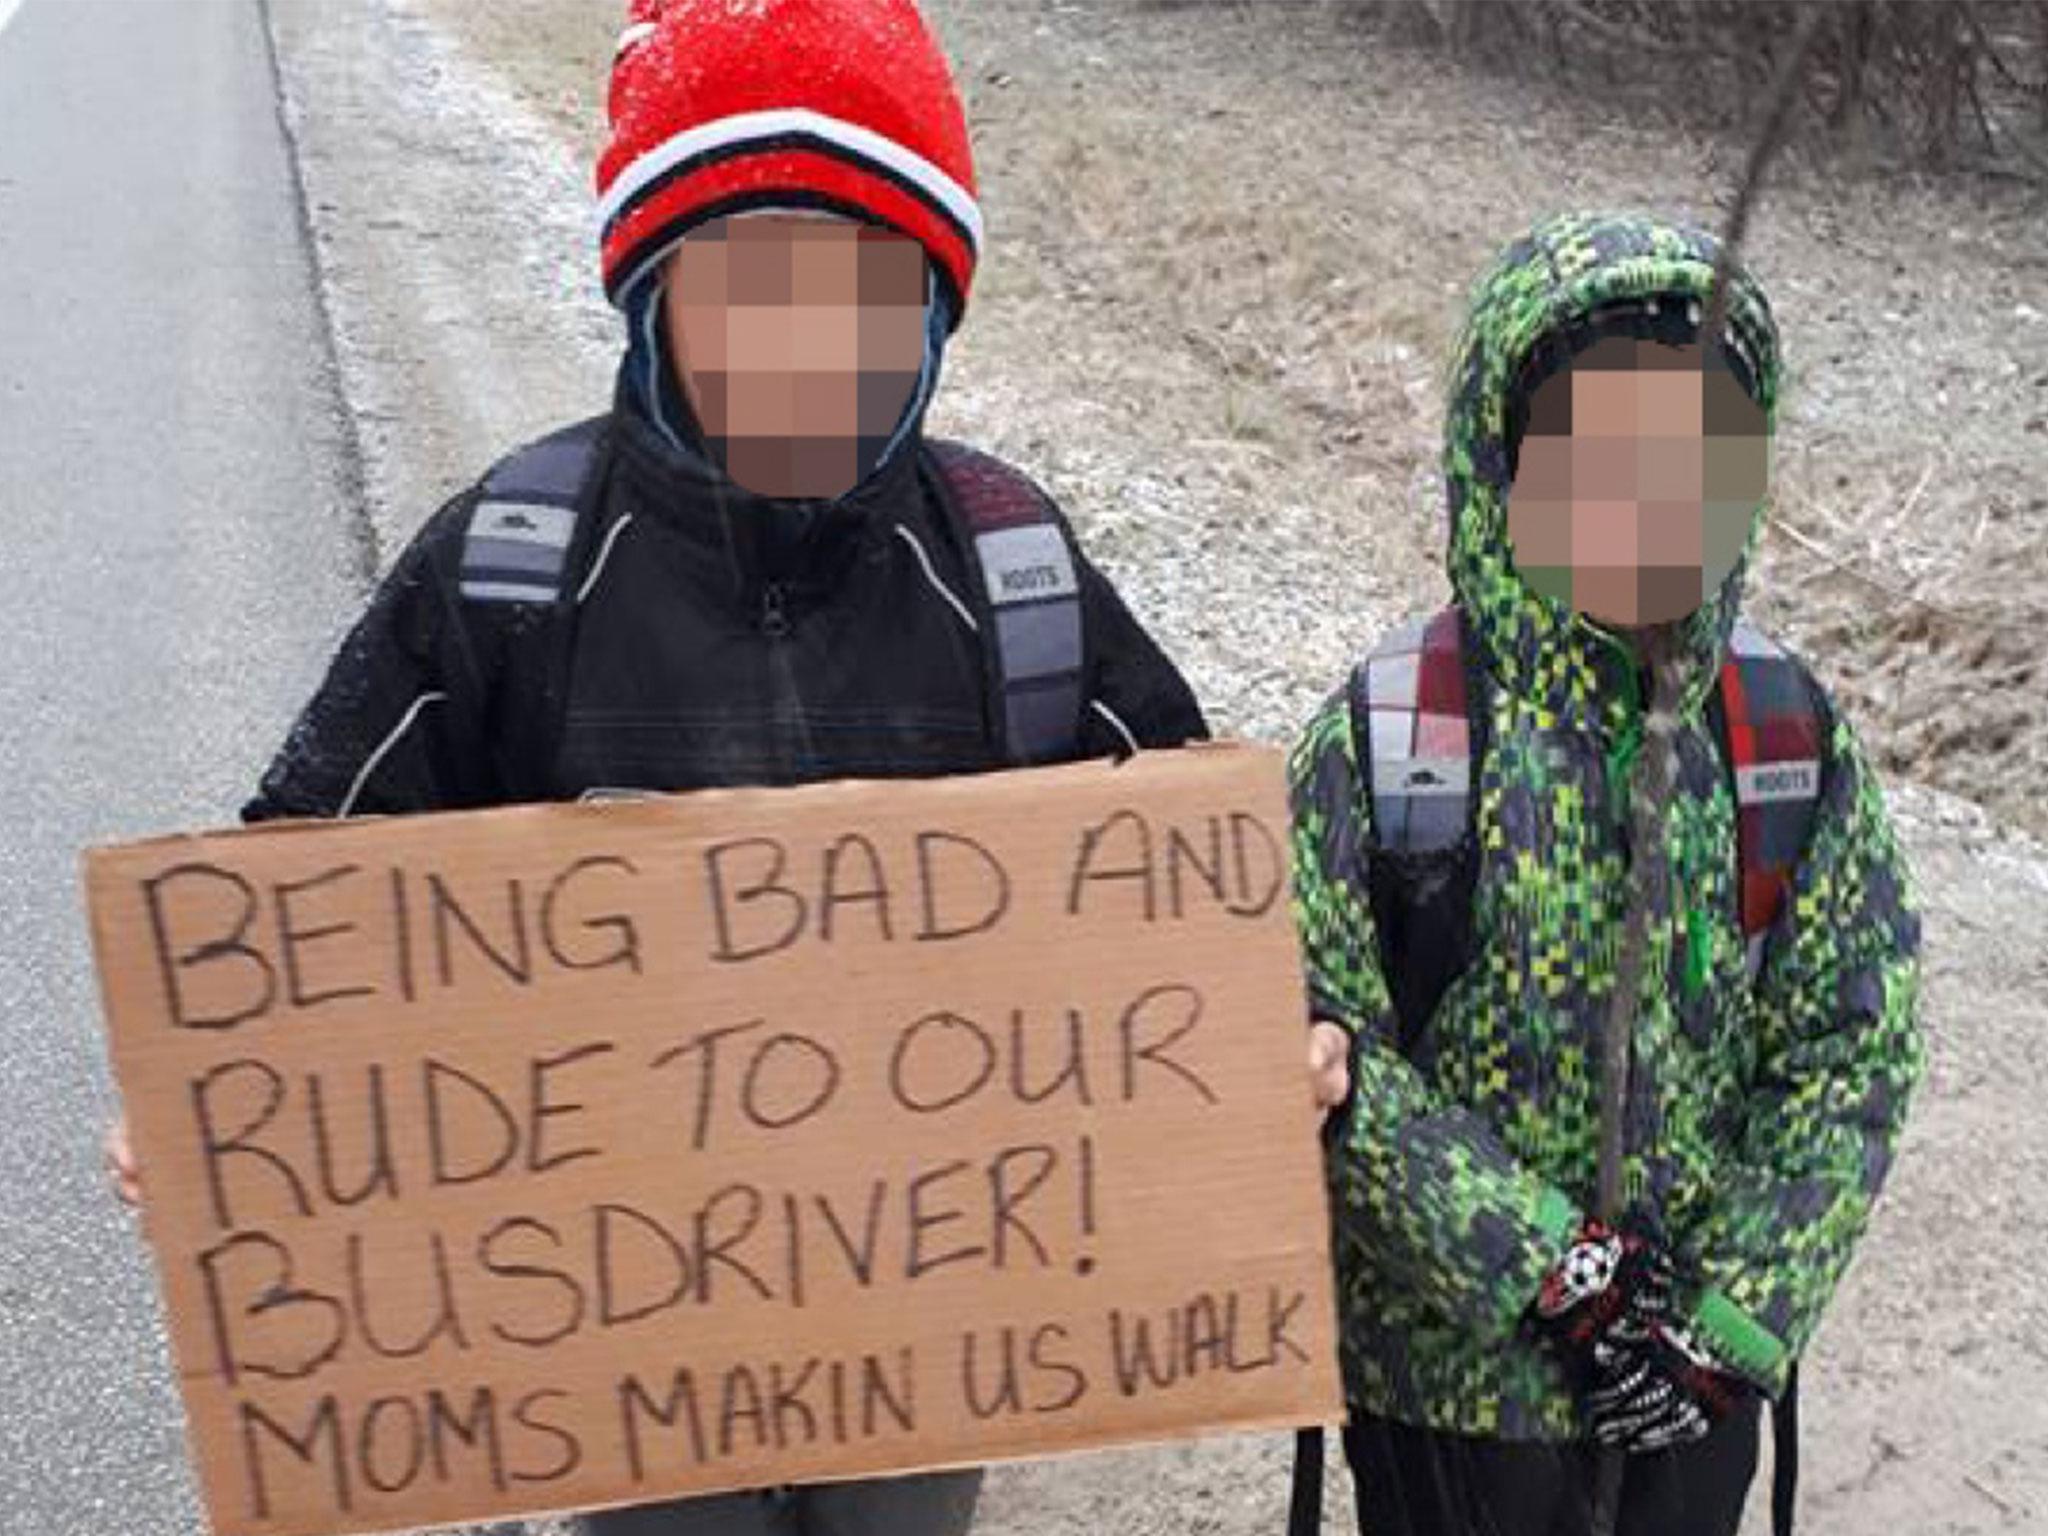 The photograph of the children walking to school was shared more than 38,000 times